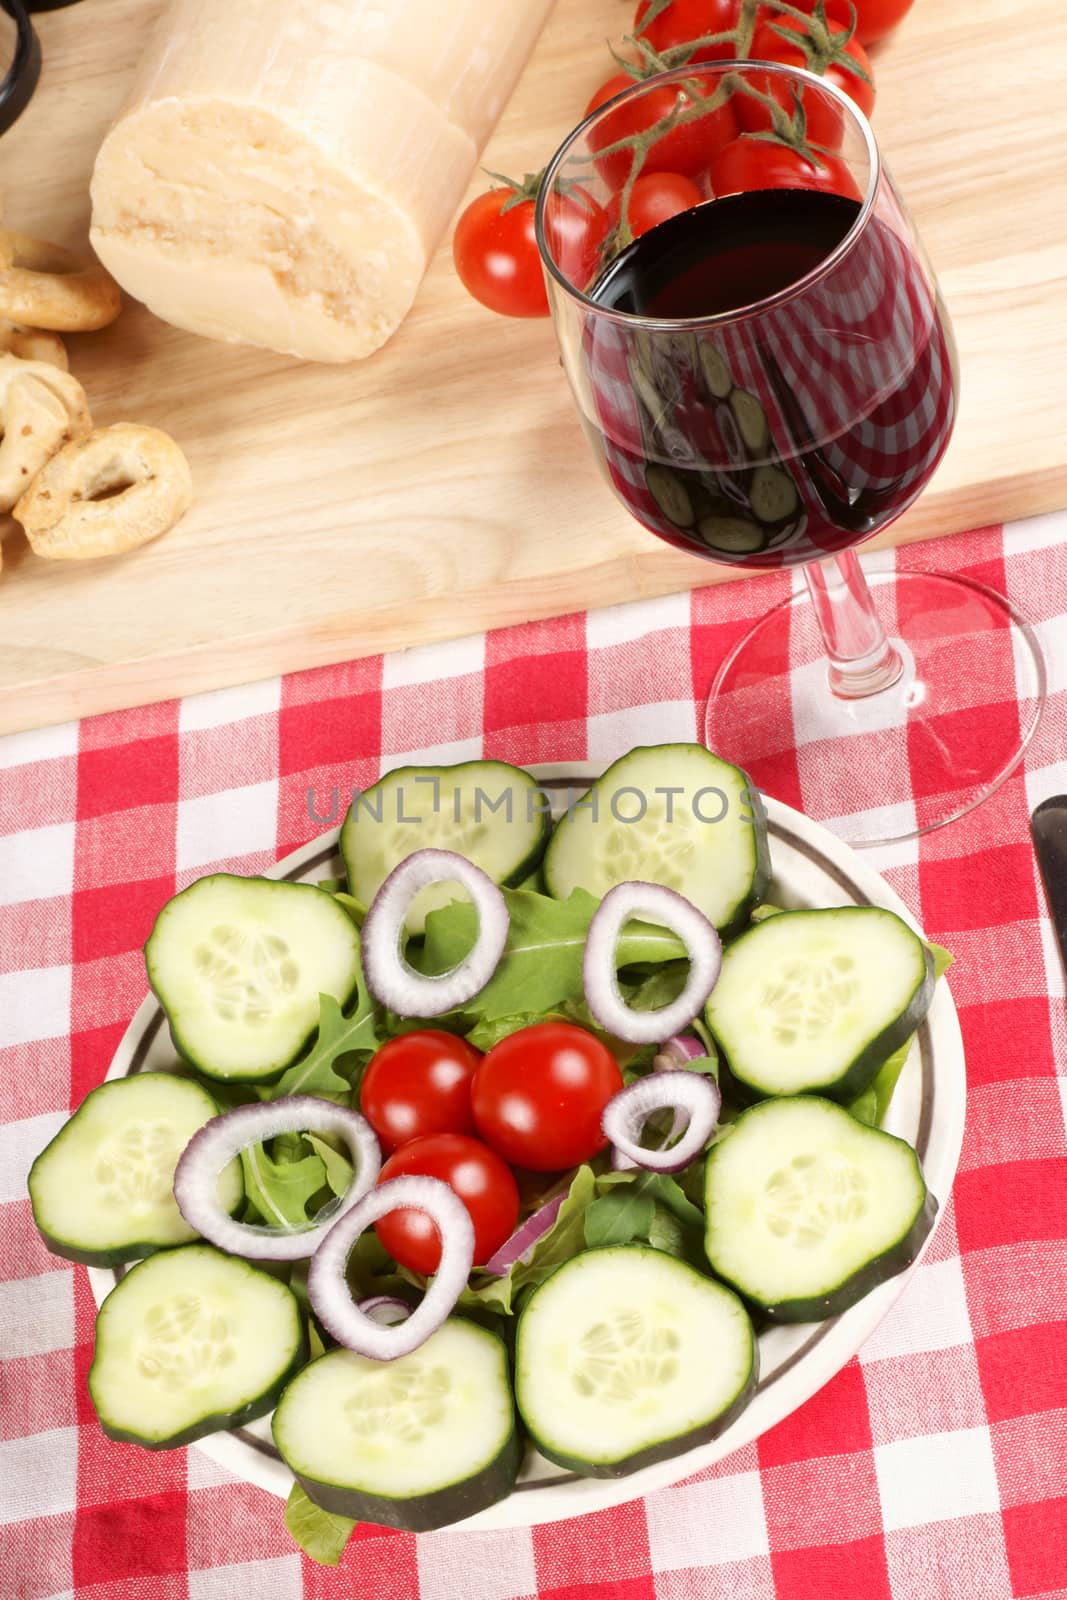 Close-up of a prepared table with an healthy salad, a glass of red wine, fork and knife. In the background some red tomatoes and parmesan cheese. Selective focus.